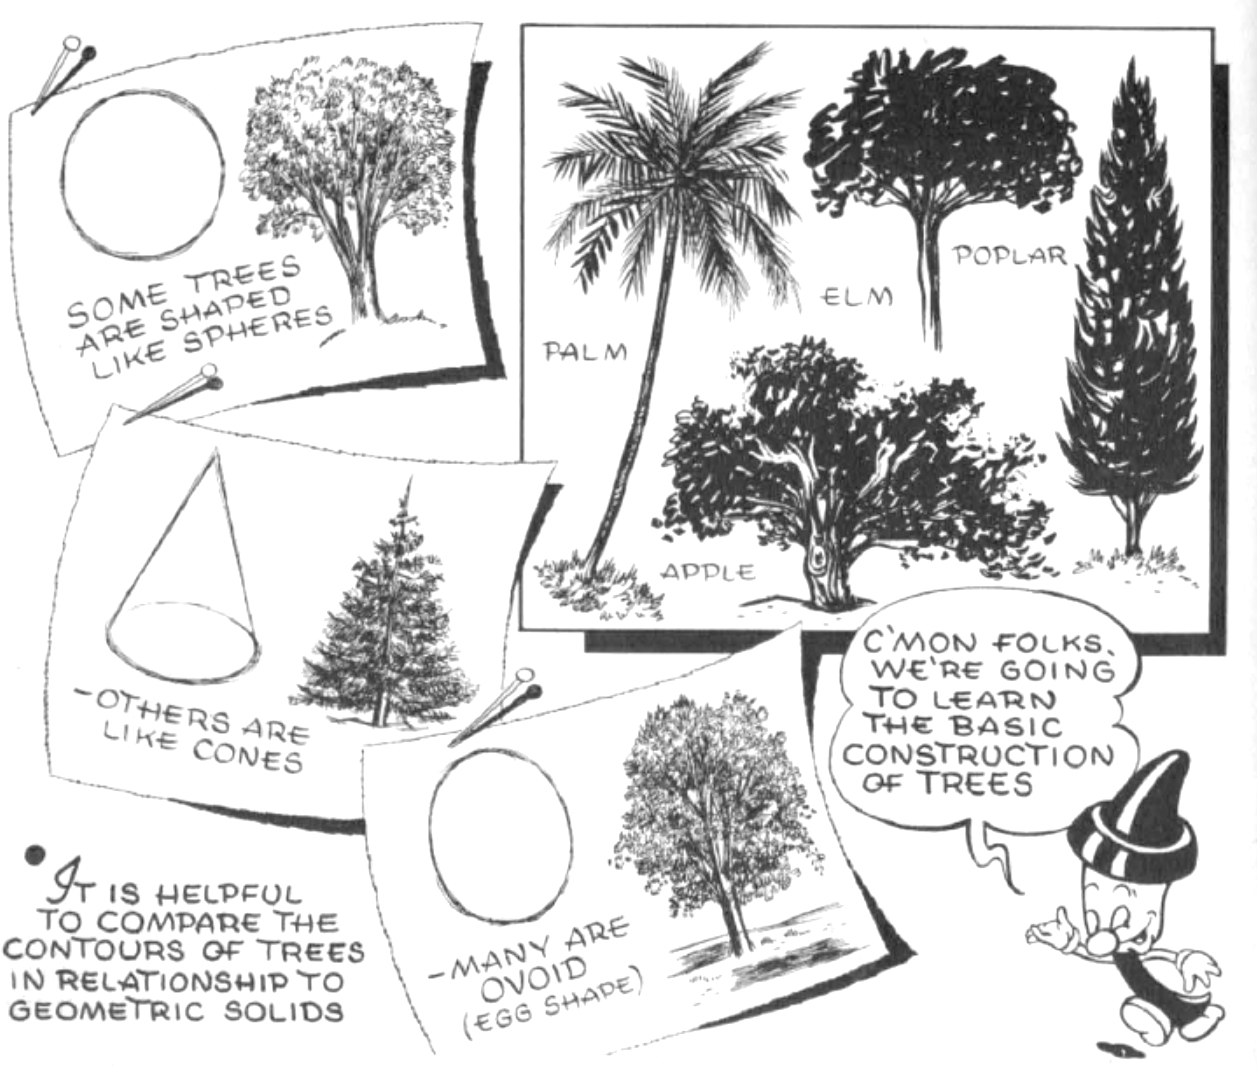 How to draw trees and nature with basic geometric shapes cone sphere cylinder